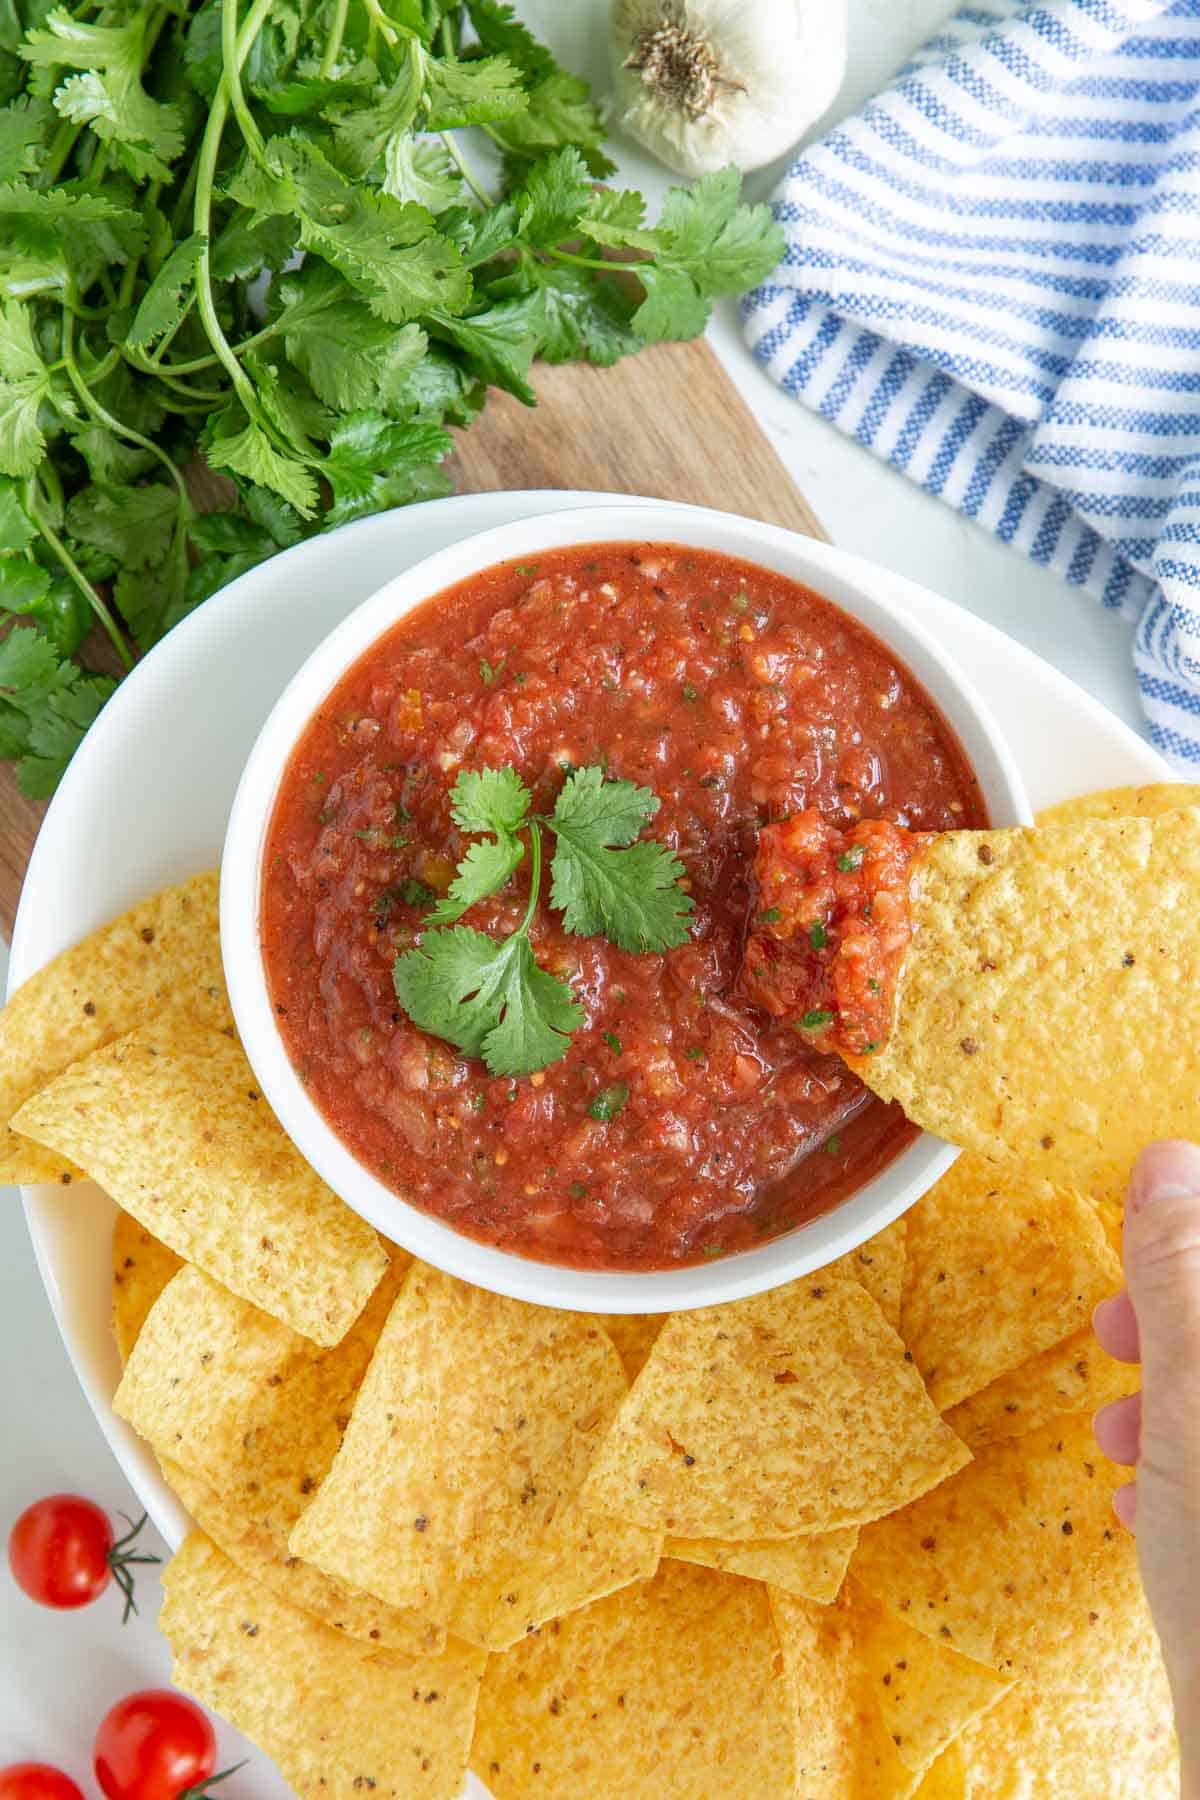 A tortilla chip being dipped into a bowl of blender salsa.